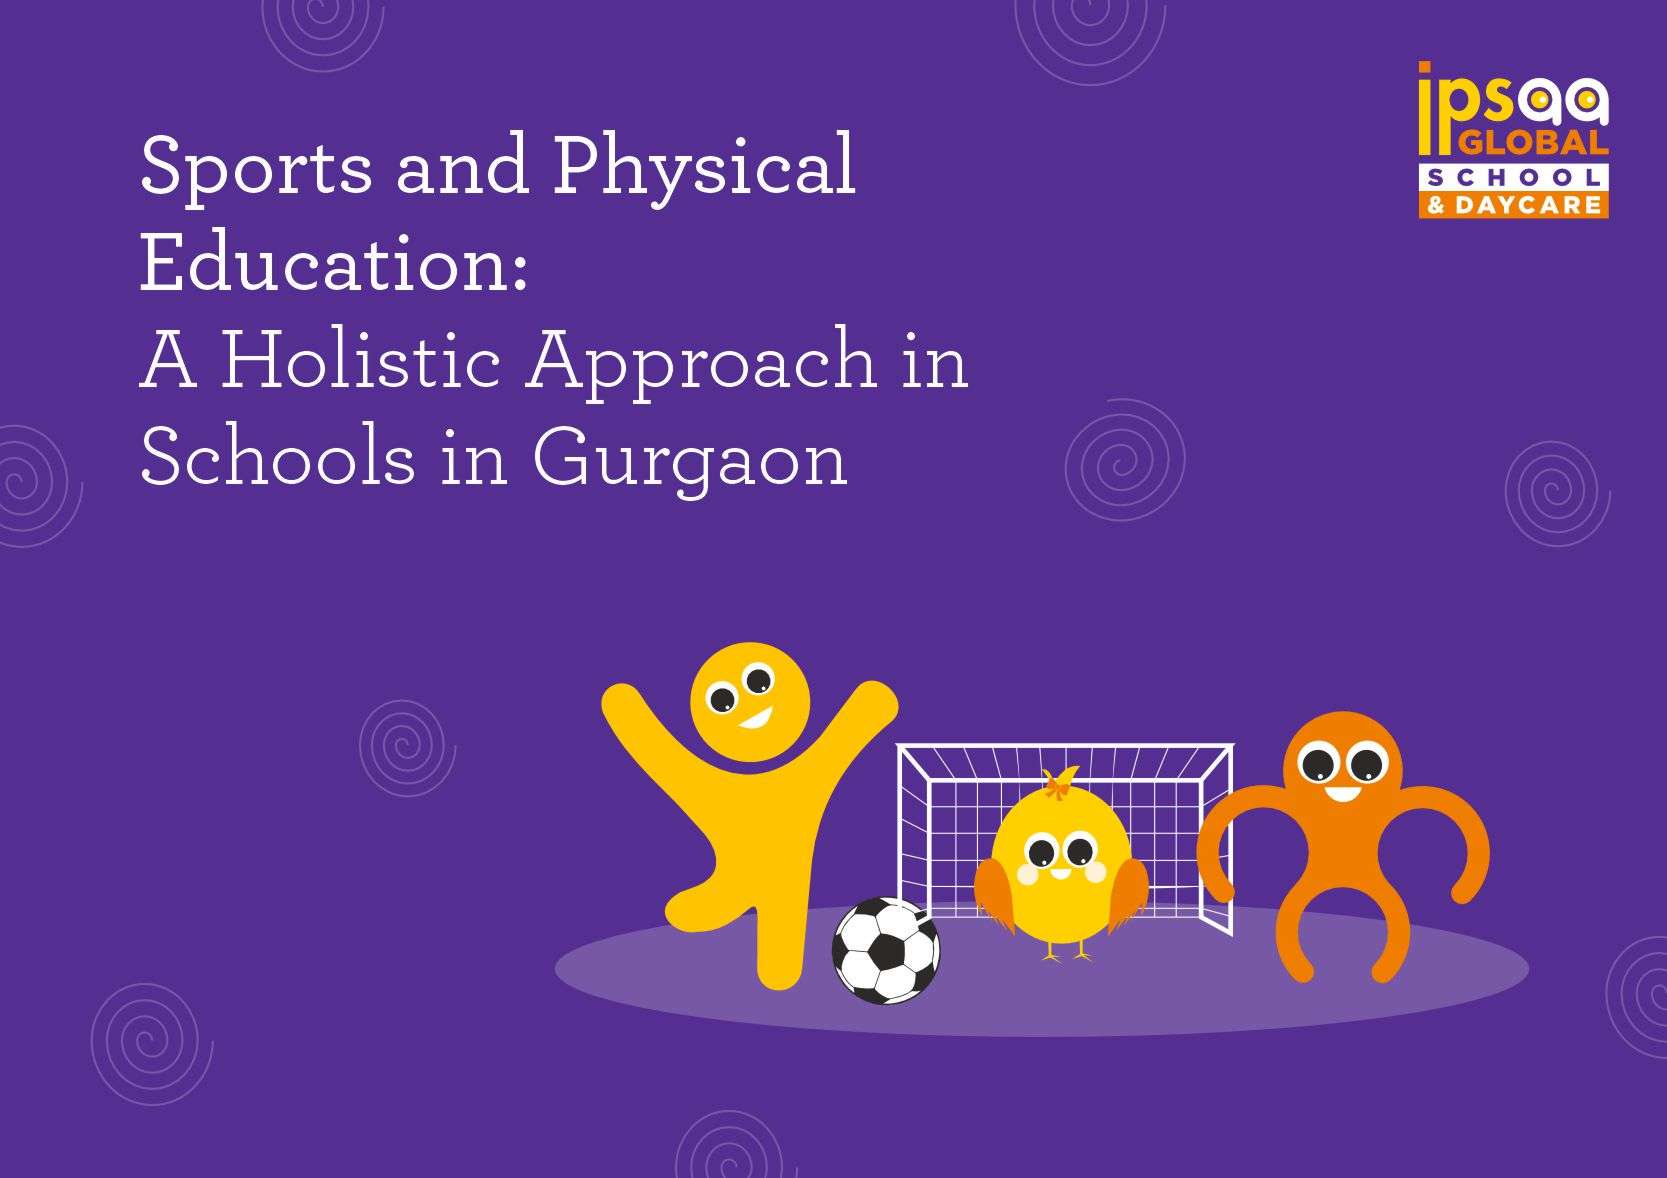 Sports and Physical Education: A Holistic Approach in Schools in Gurgaon